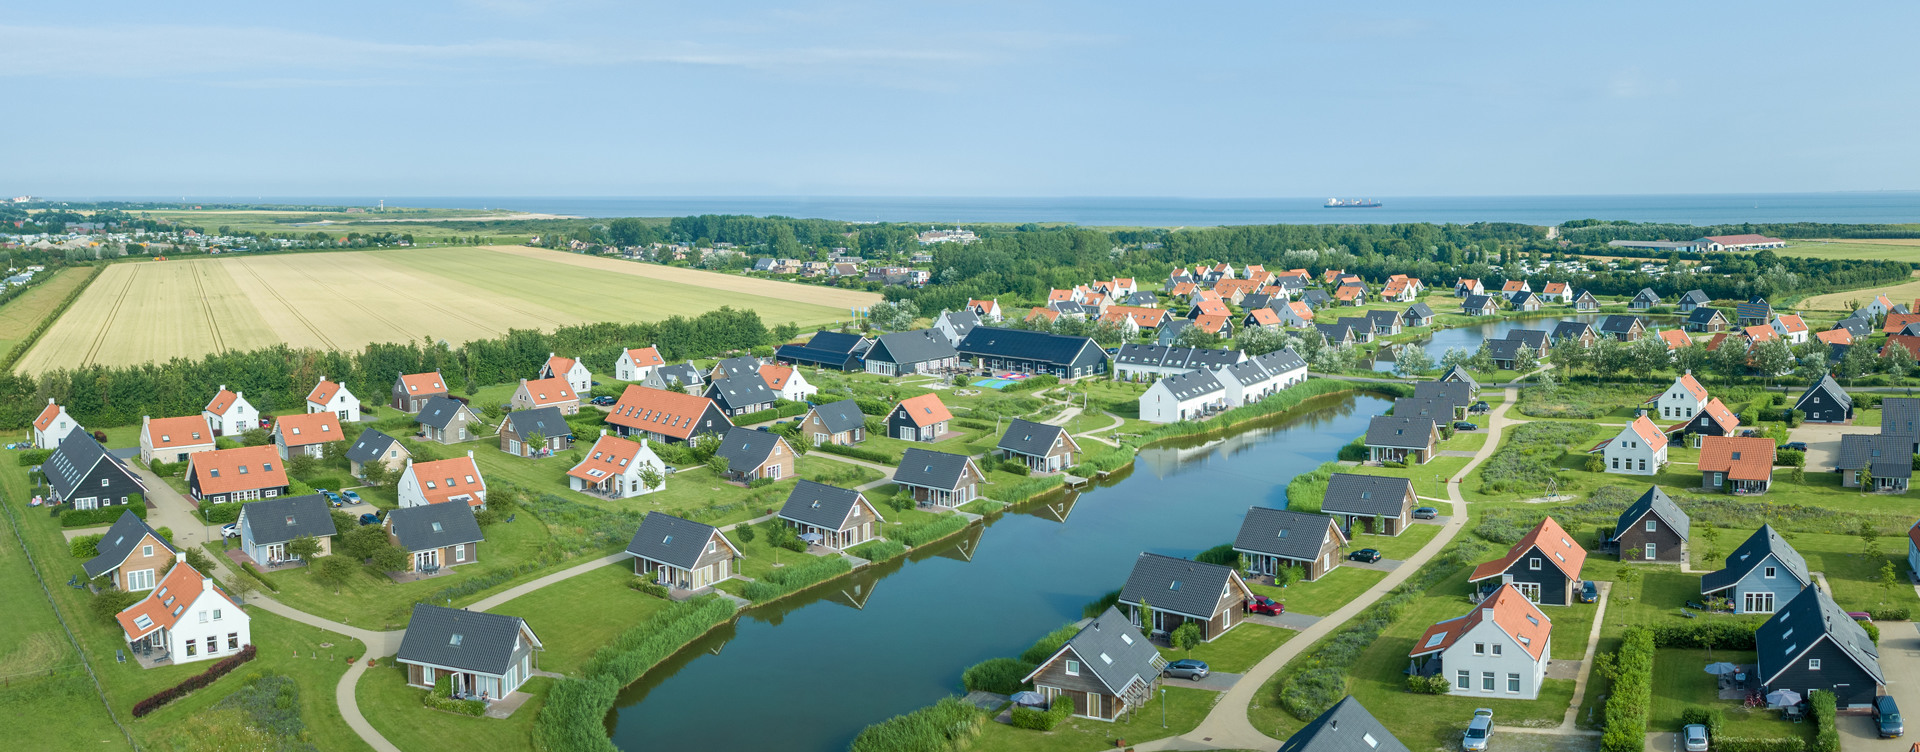 The perfect destination on the Zeeland coast
for young and old